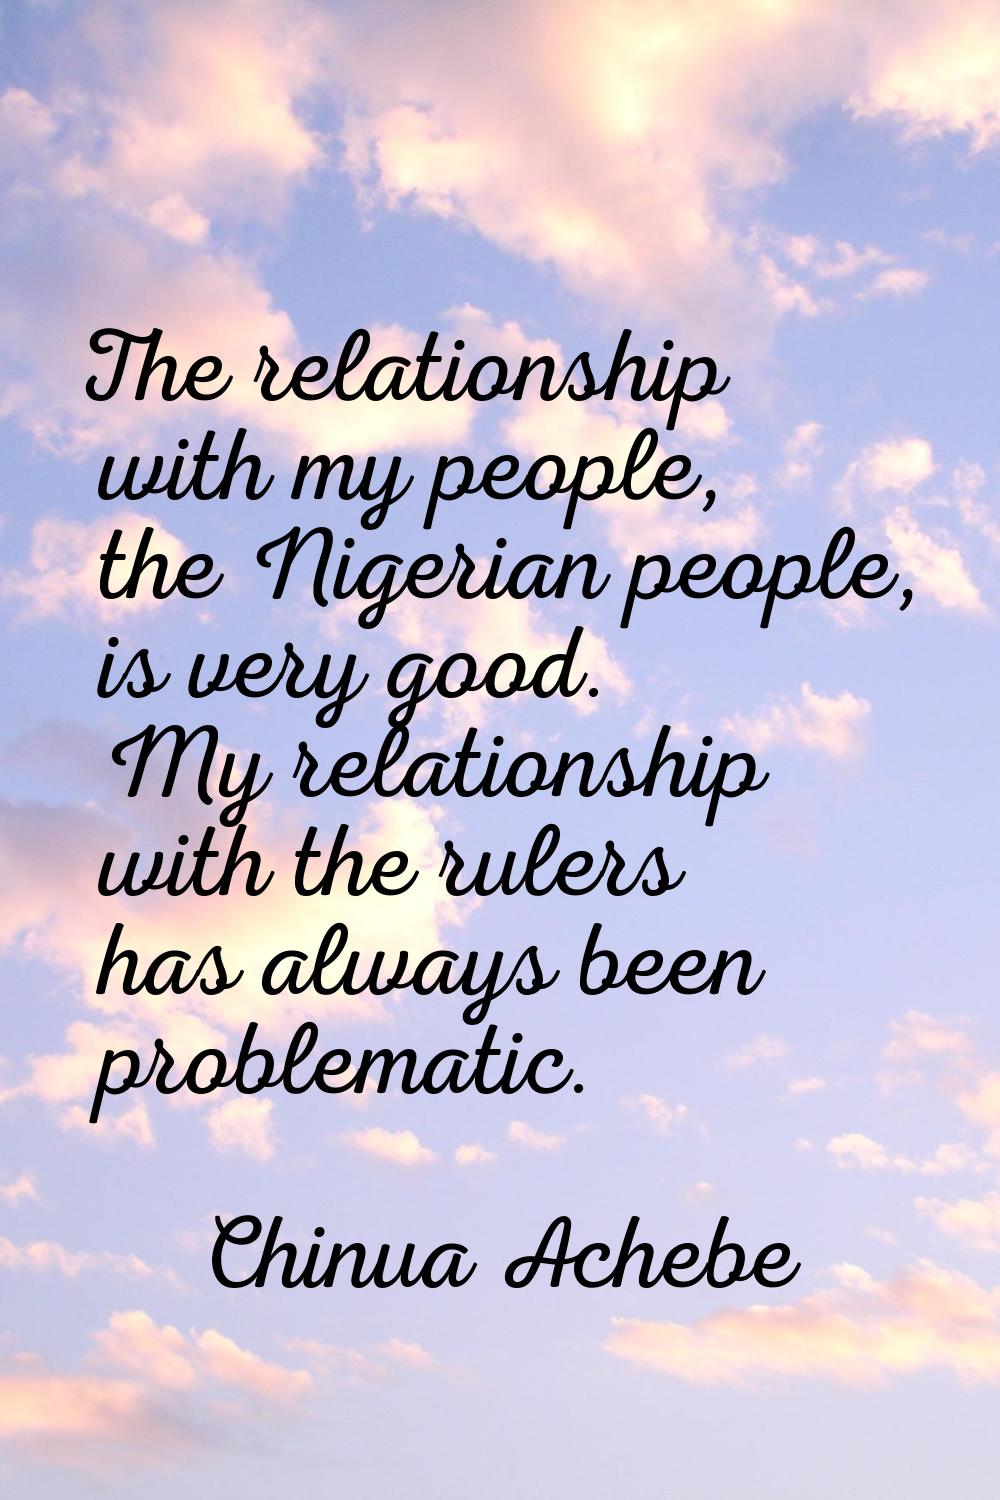 The relationship with my people, the Nigerian people, is very good. My relationship with the rulers